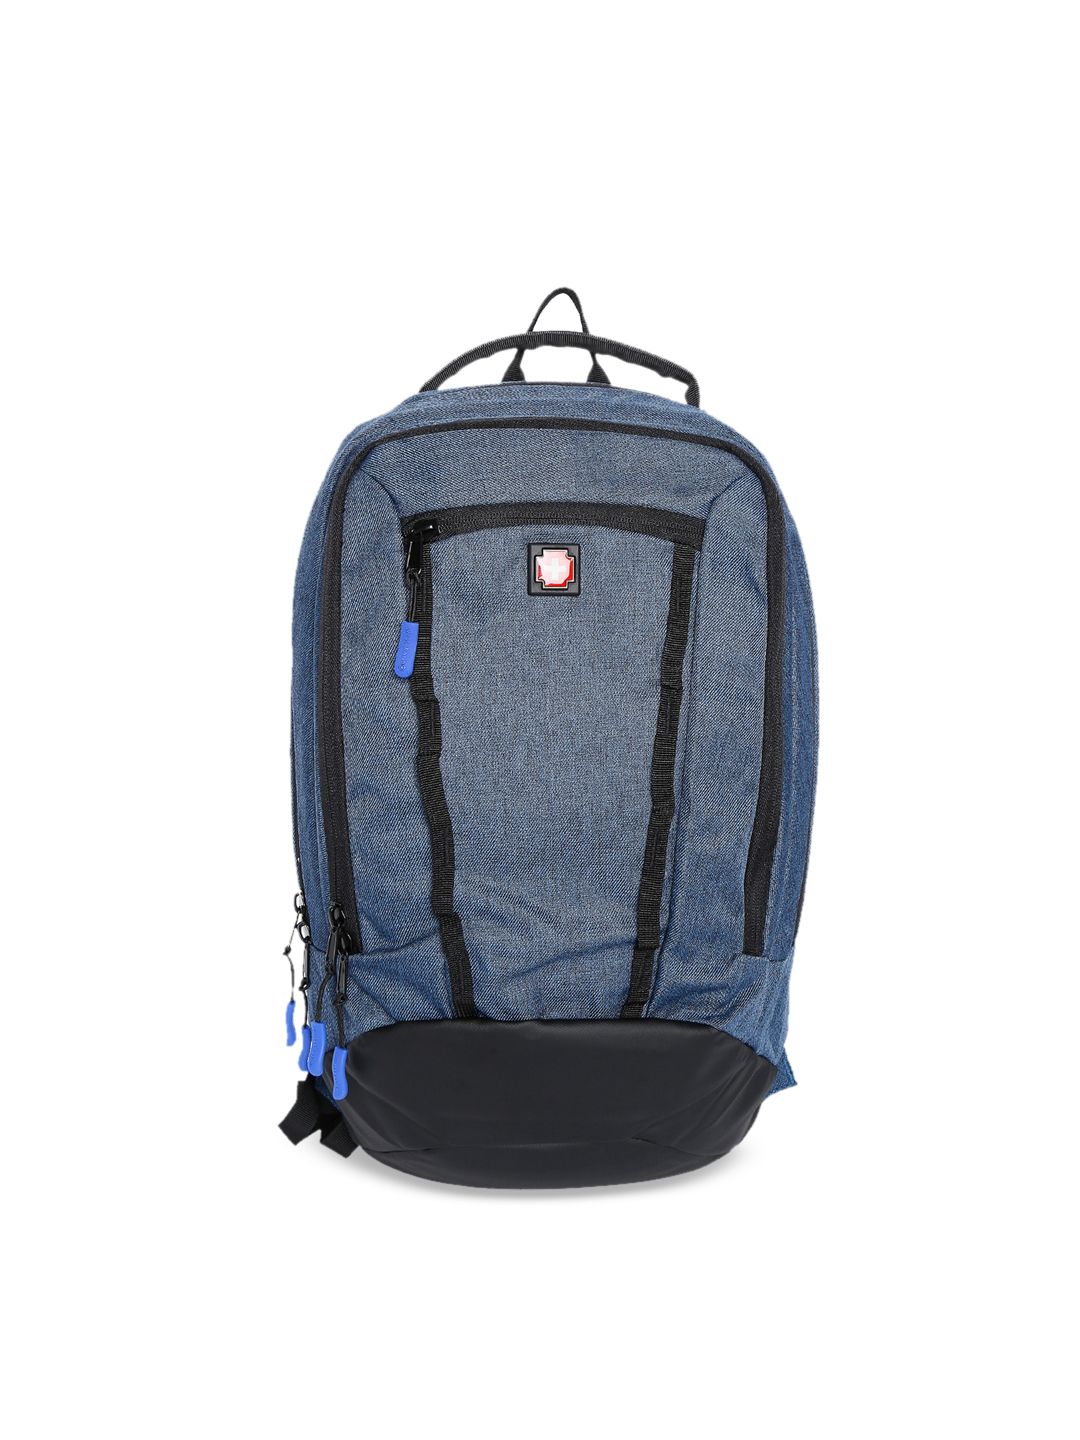 SWISS BRAND Calgary Unisex Navy Blue Solid Backpack Price in India